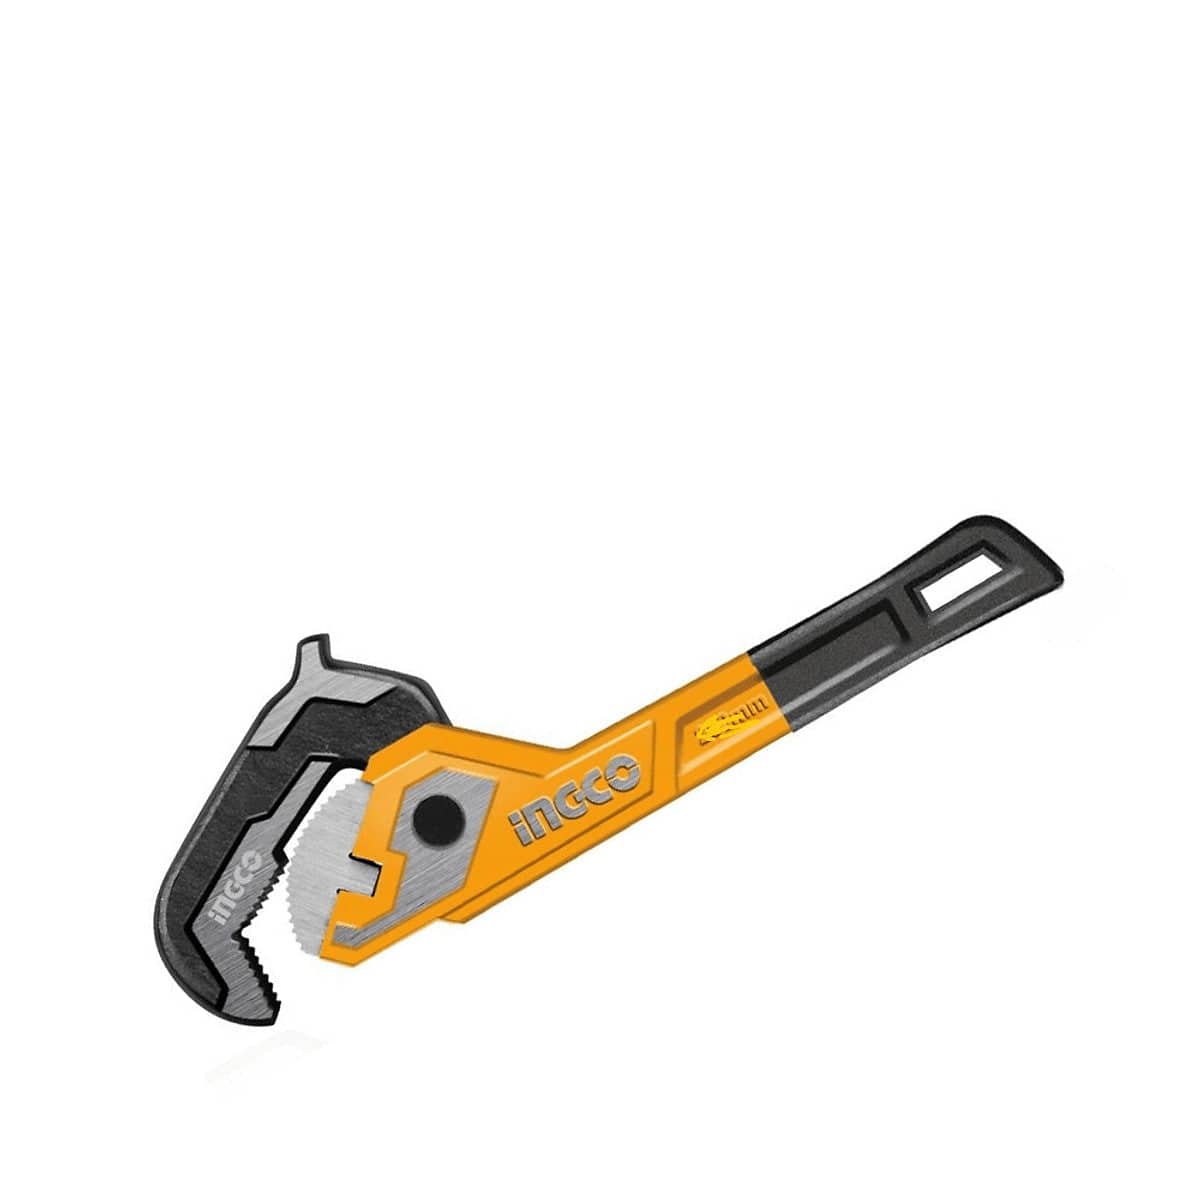 Ingco Ratcheting Pipe Wrench (10", 14") | Buy Online in Accra, Ghana - Supply Master Wrenches Buy Tools hardware Building materials